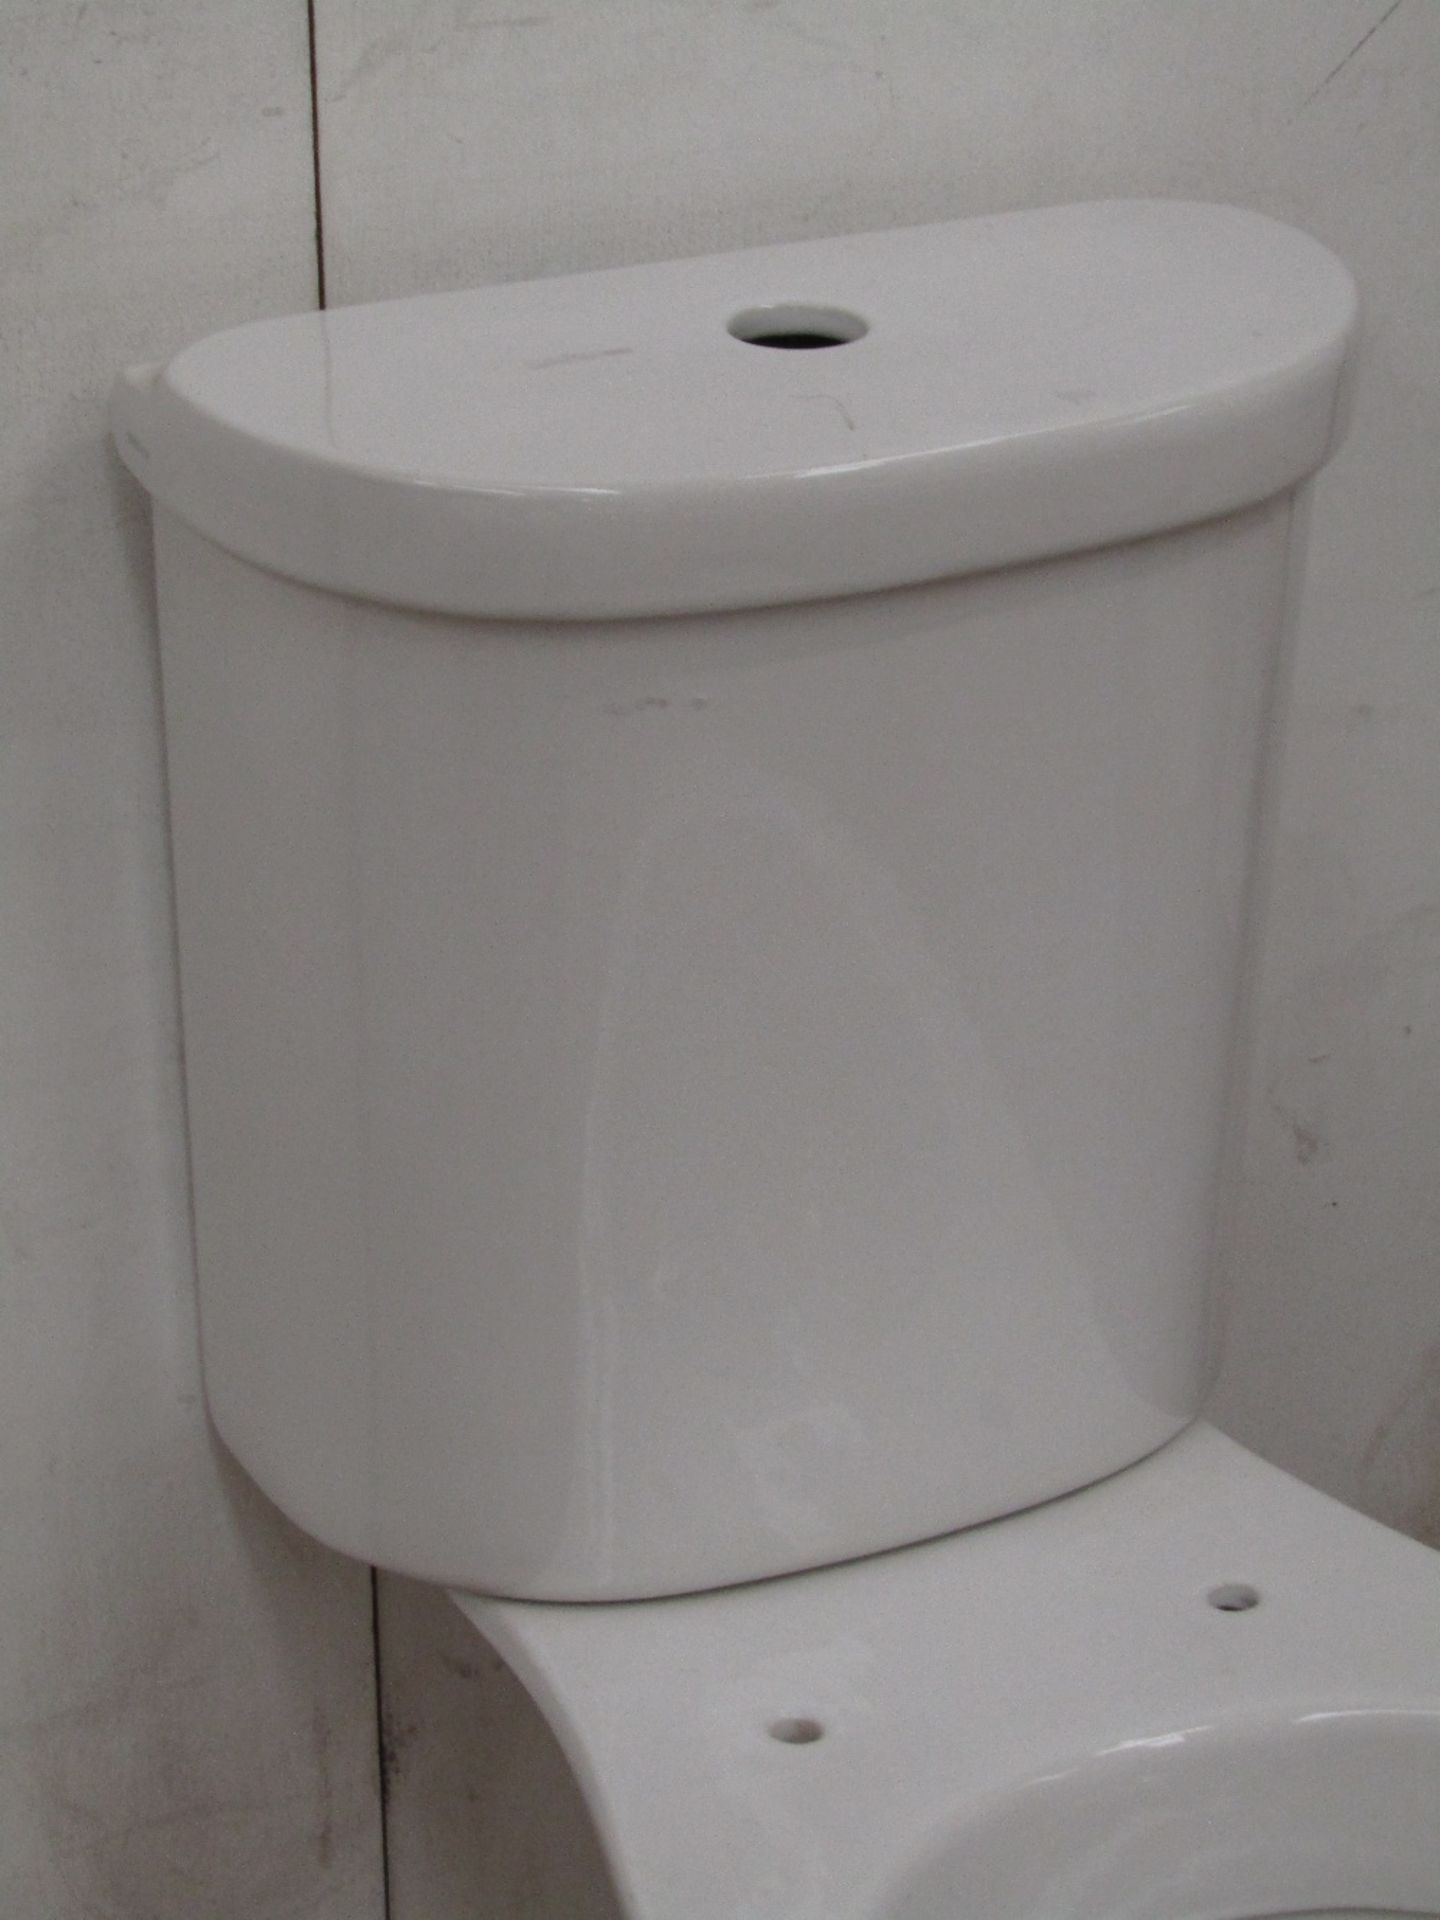 Heritage Bathrooms Caprieze Close Coupled Cistern 4L. New & Boxed.